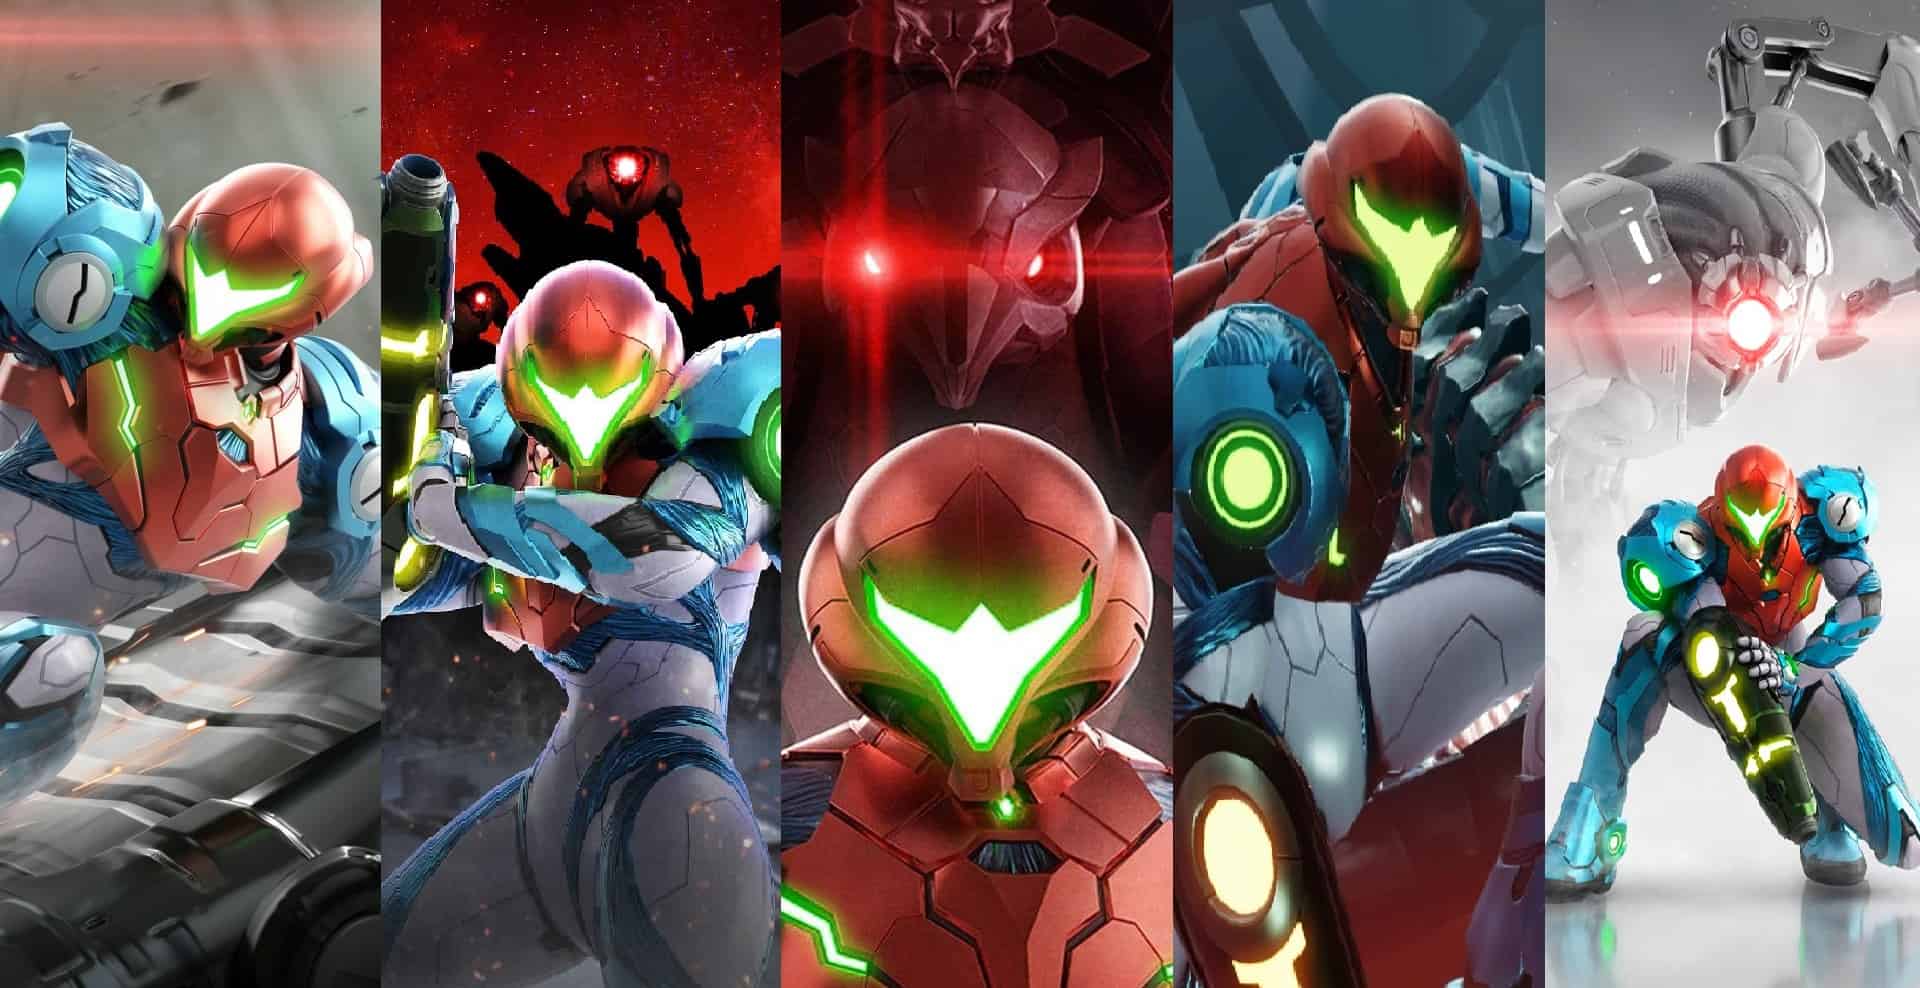 It Takes Two Wins GOTY At The Game Awards 2021, Beating Metroid Dread